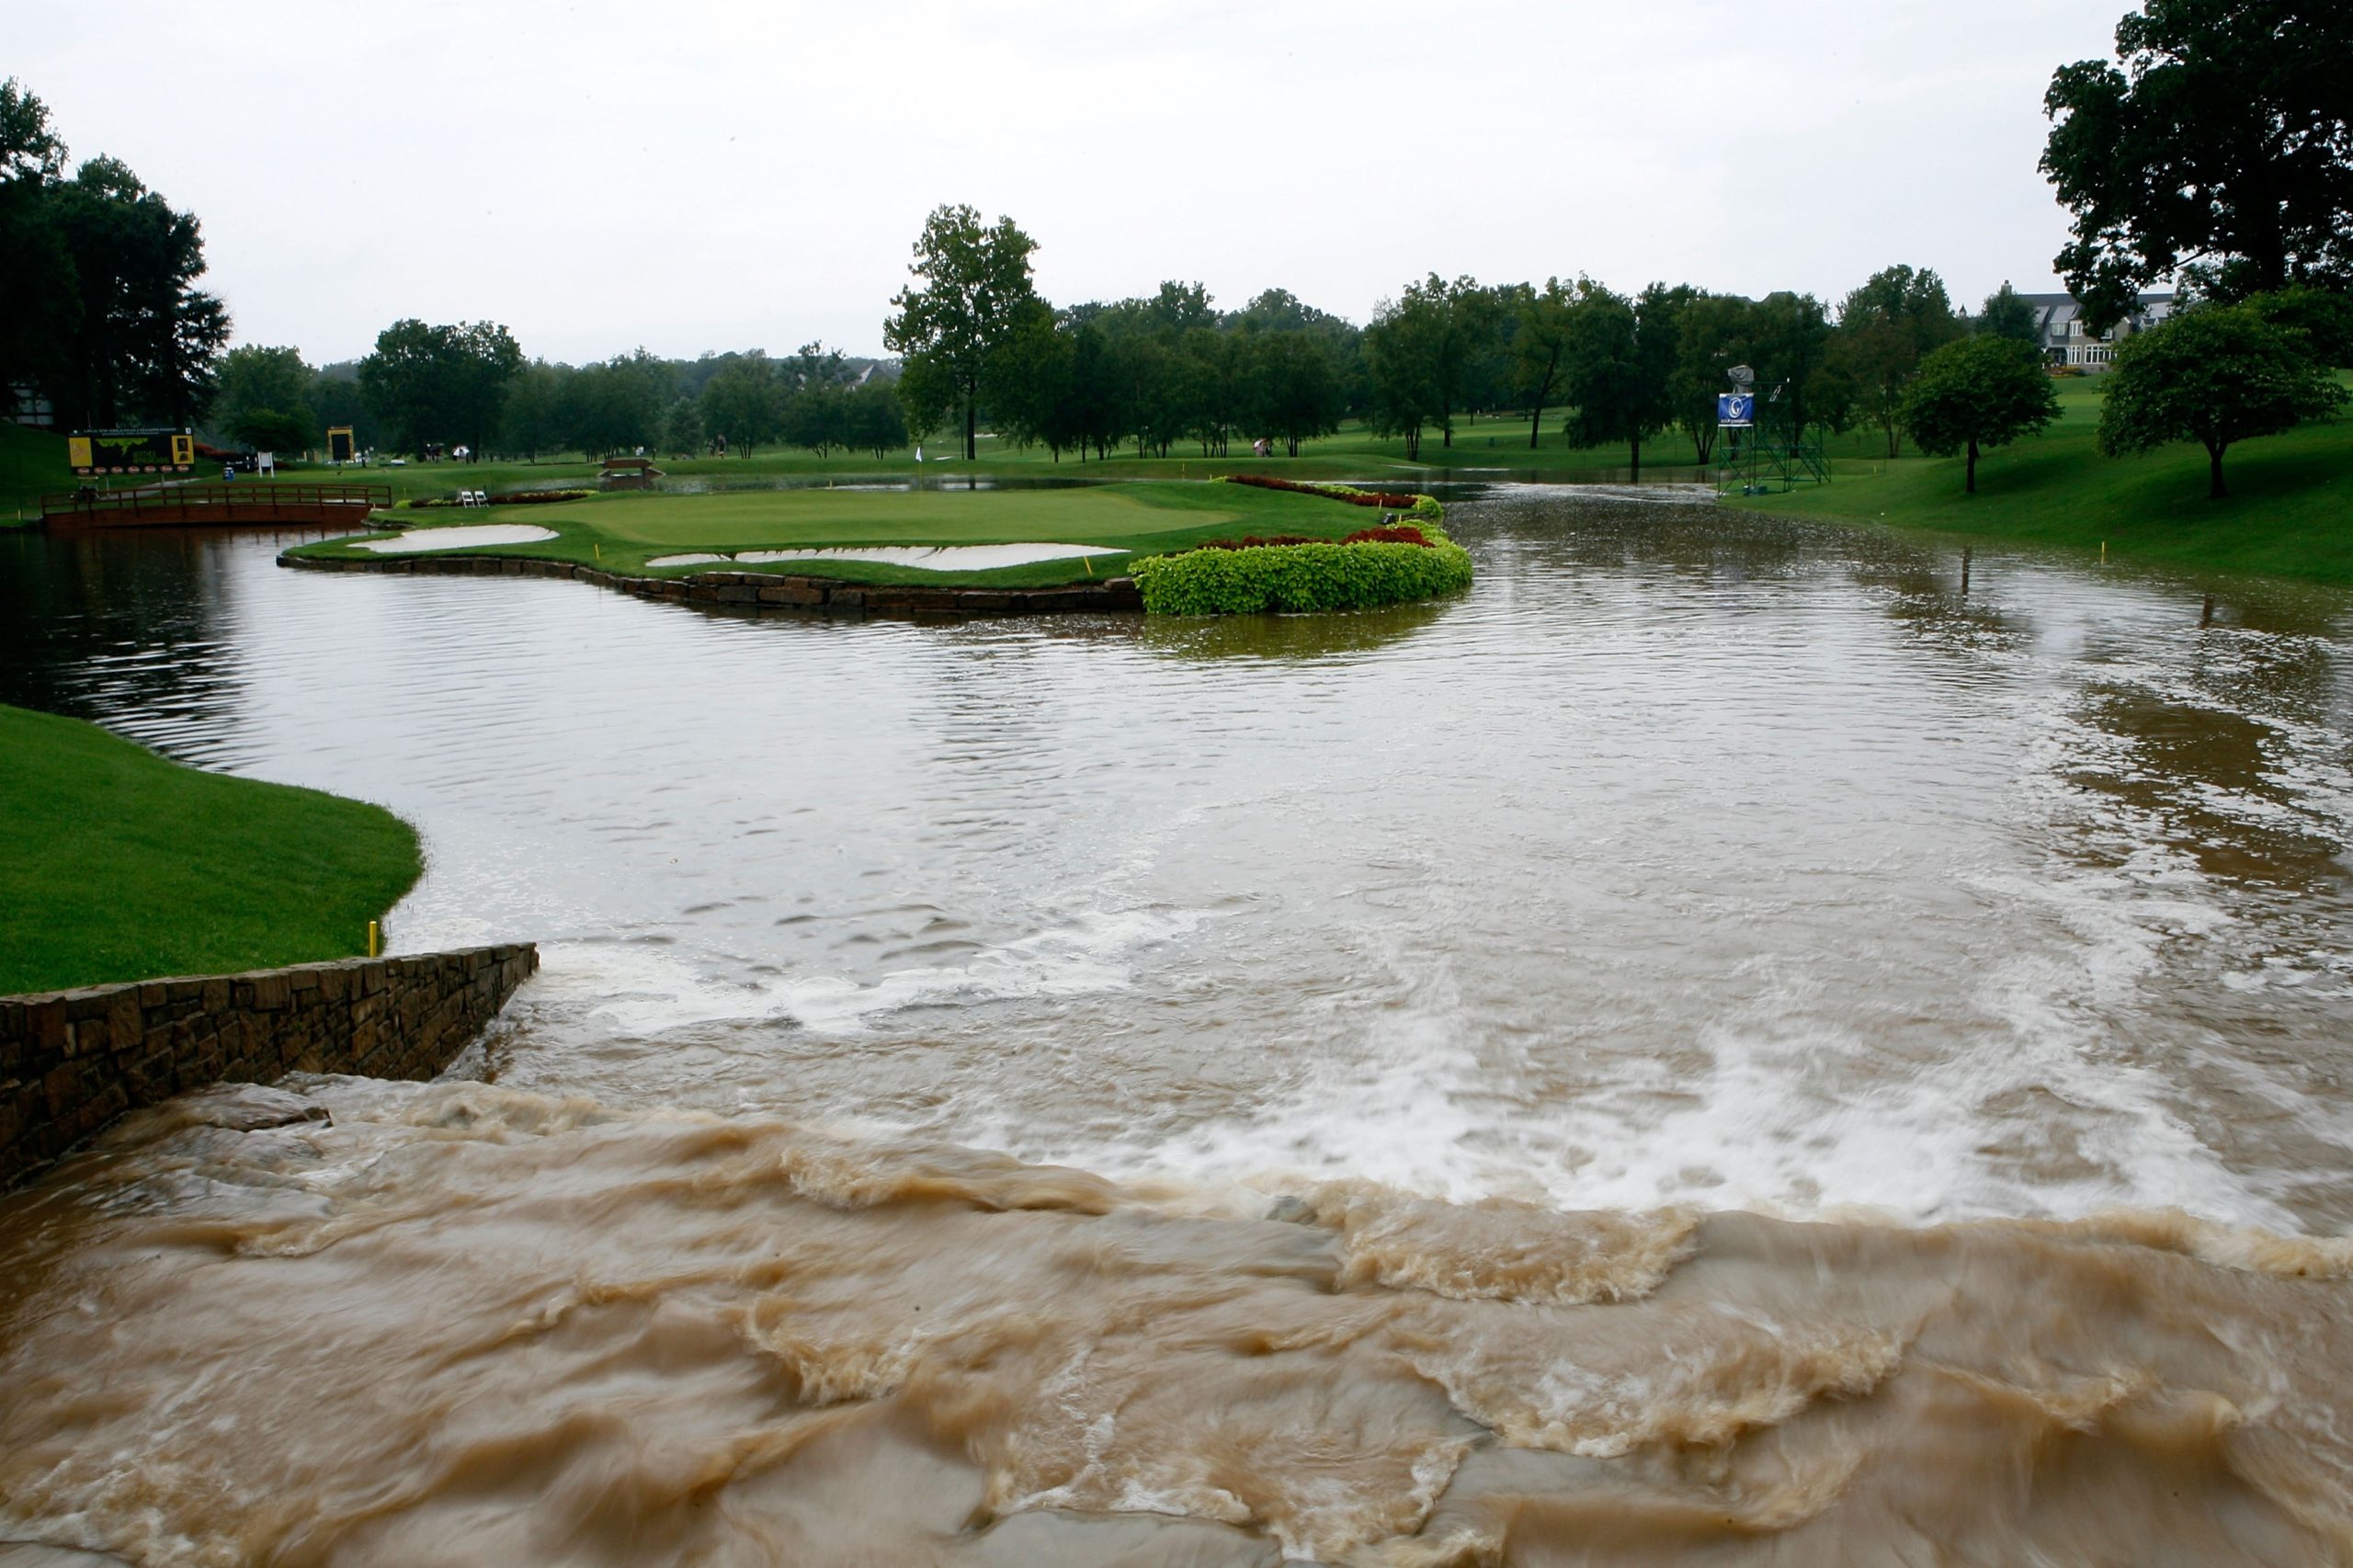 ROGERS, AR - SEPTEMBER 08: Water flows rapidly into the pond around the 15th green after play was suspended for the day at 10:49am cst during the second round of the 2007 LPGA NW Arkansas Championship presented by John Q. Hammons at Pinnacle Country Club on September 8, 2007 in Rogers, Arkansas. (Photo by Kevin C. Cox/Getty Images)